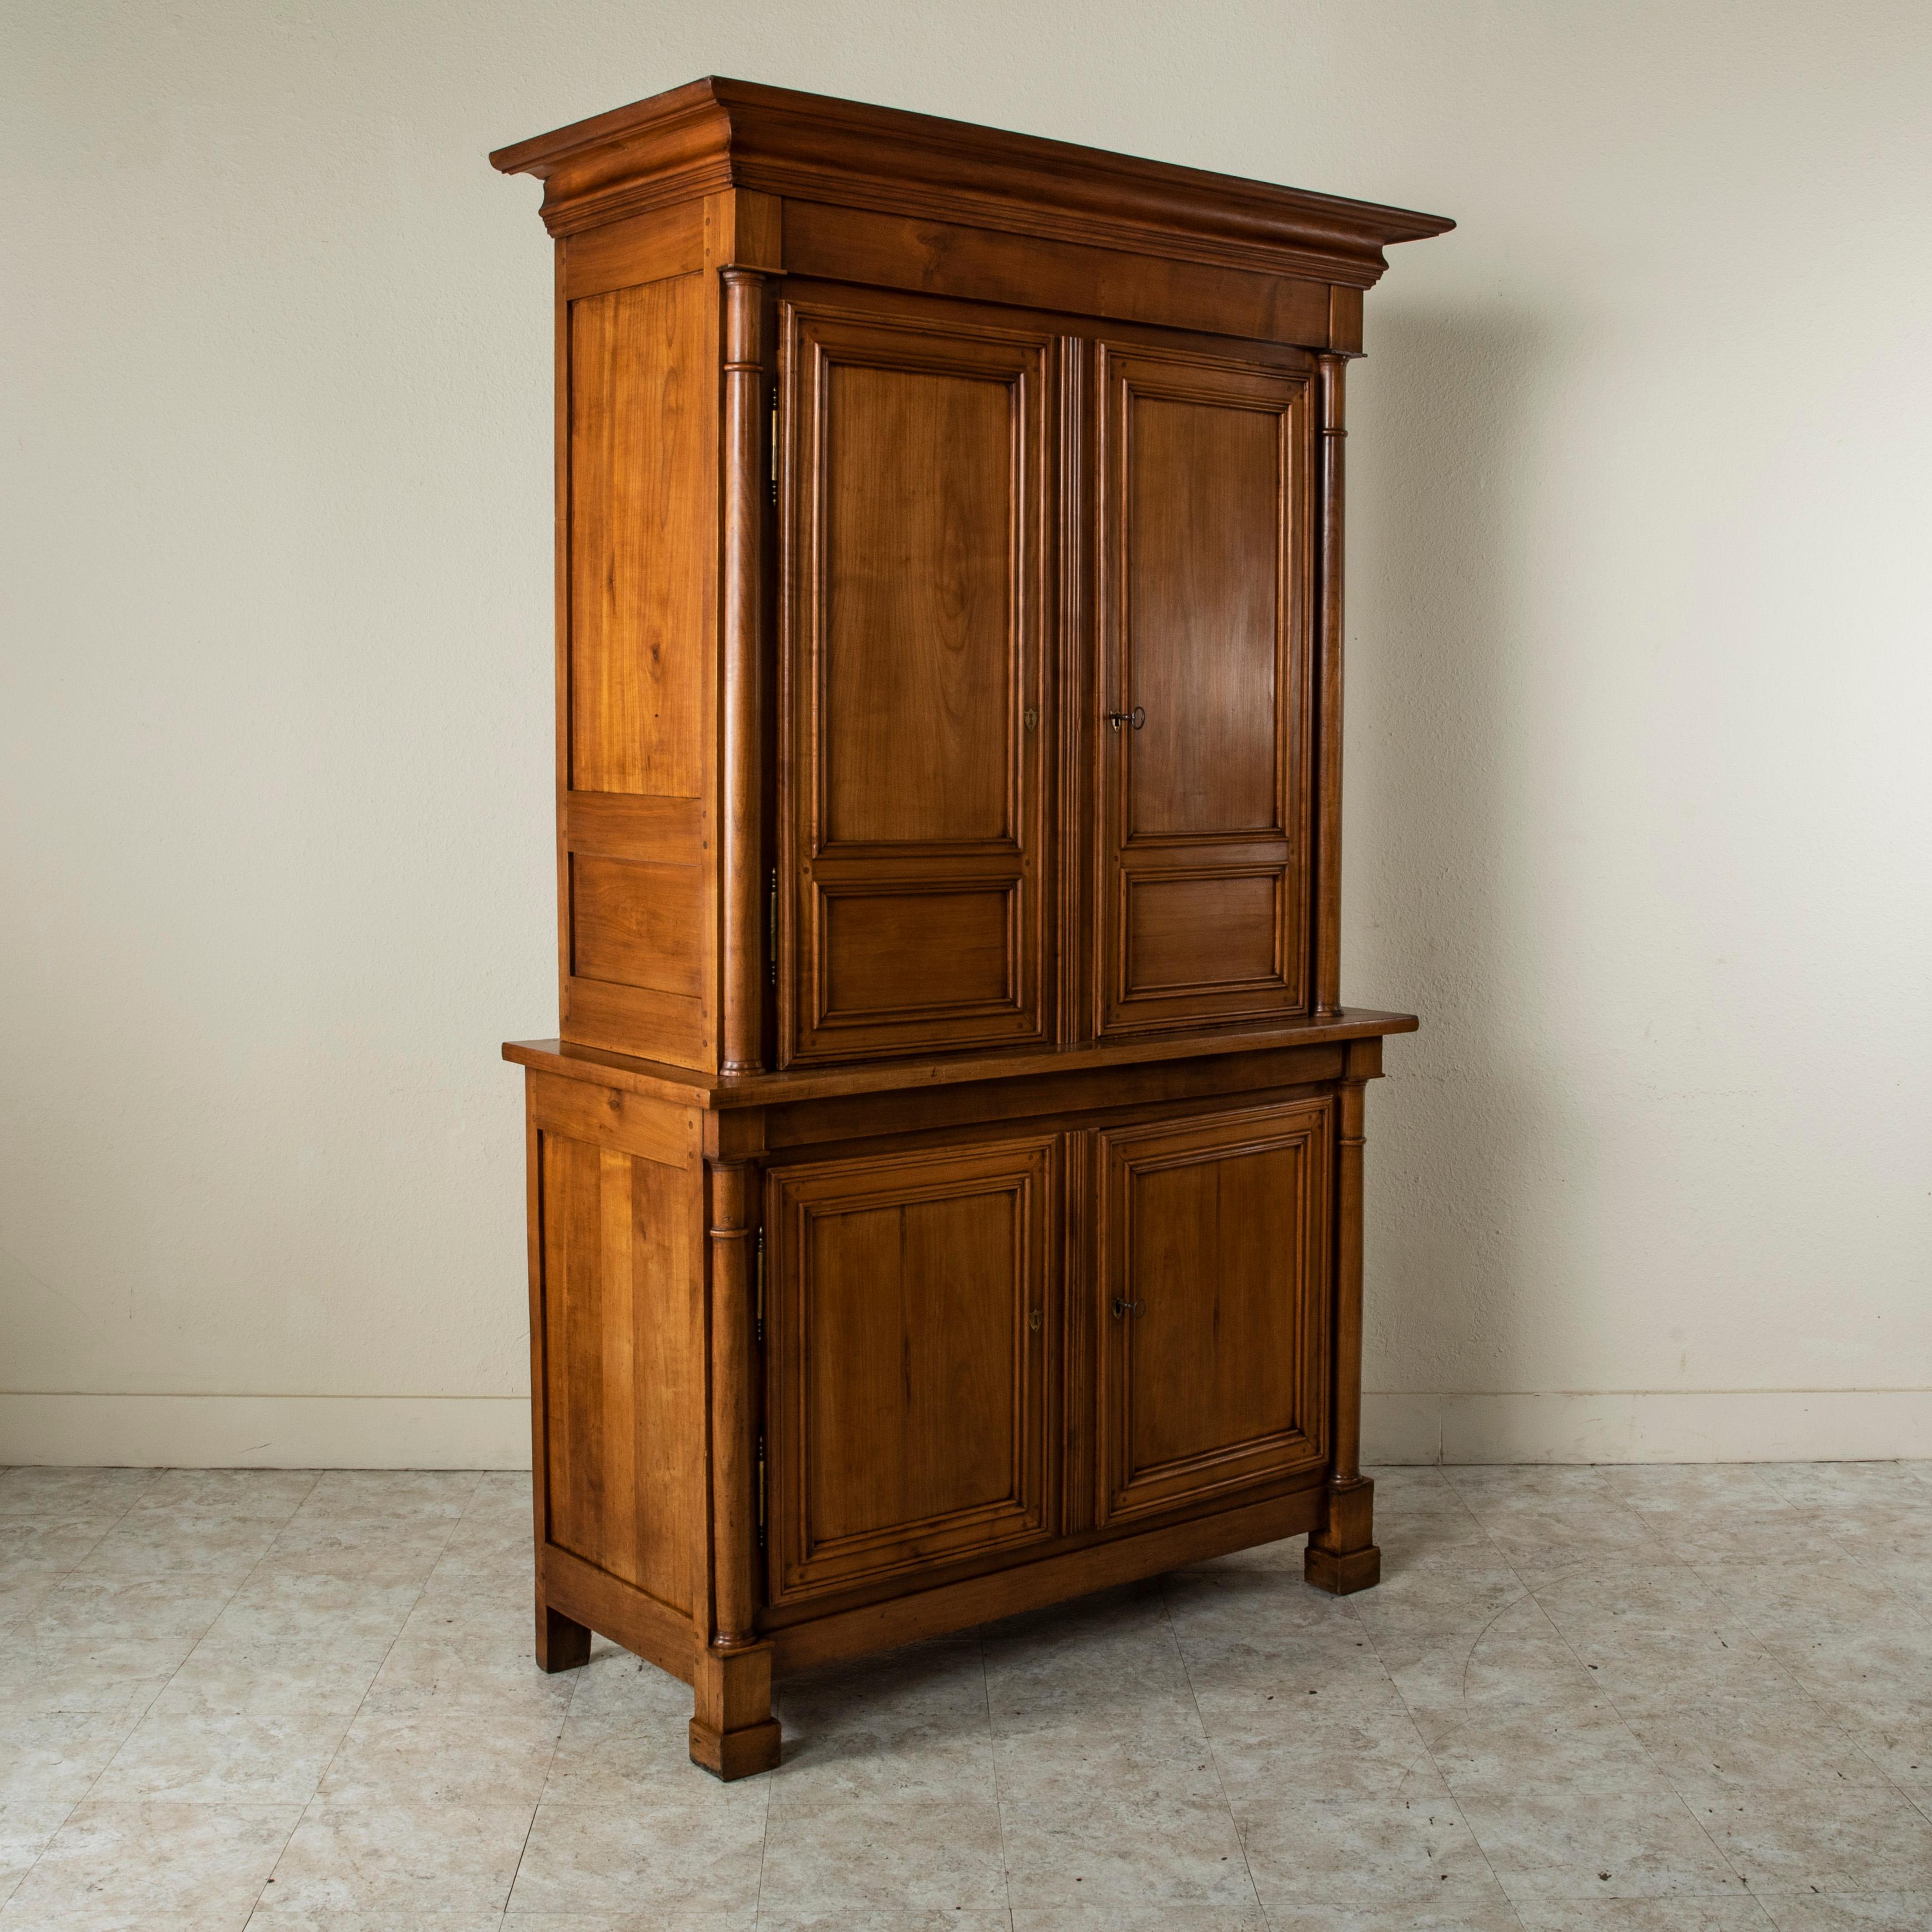 This mid-nineteenth century French Empire style hand pegged cherrywood buffet deux corps features classic half columns that flank both the upper and lower doors. The two doors to the upper cabinet open to reveal an interior with two shelves. Two